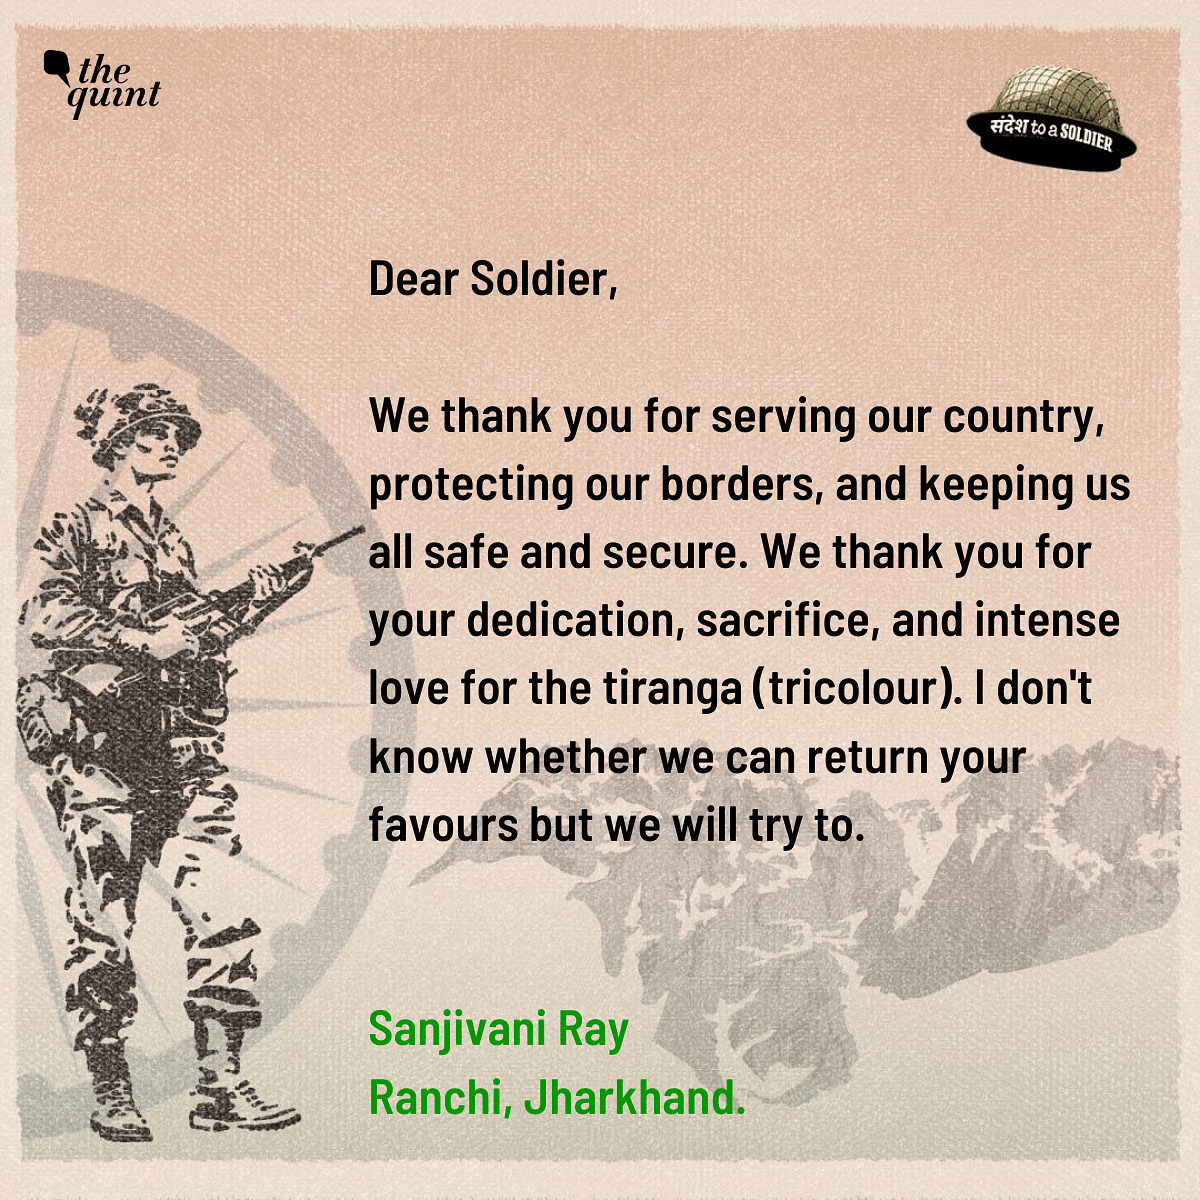 Citizens across India pen down their sandesh to a soldier, honouring their valour and selflessness.